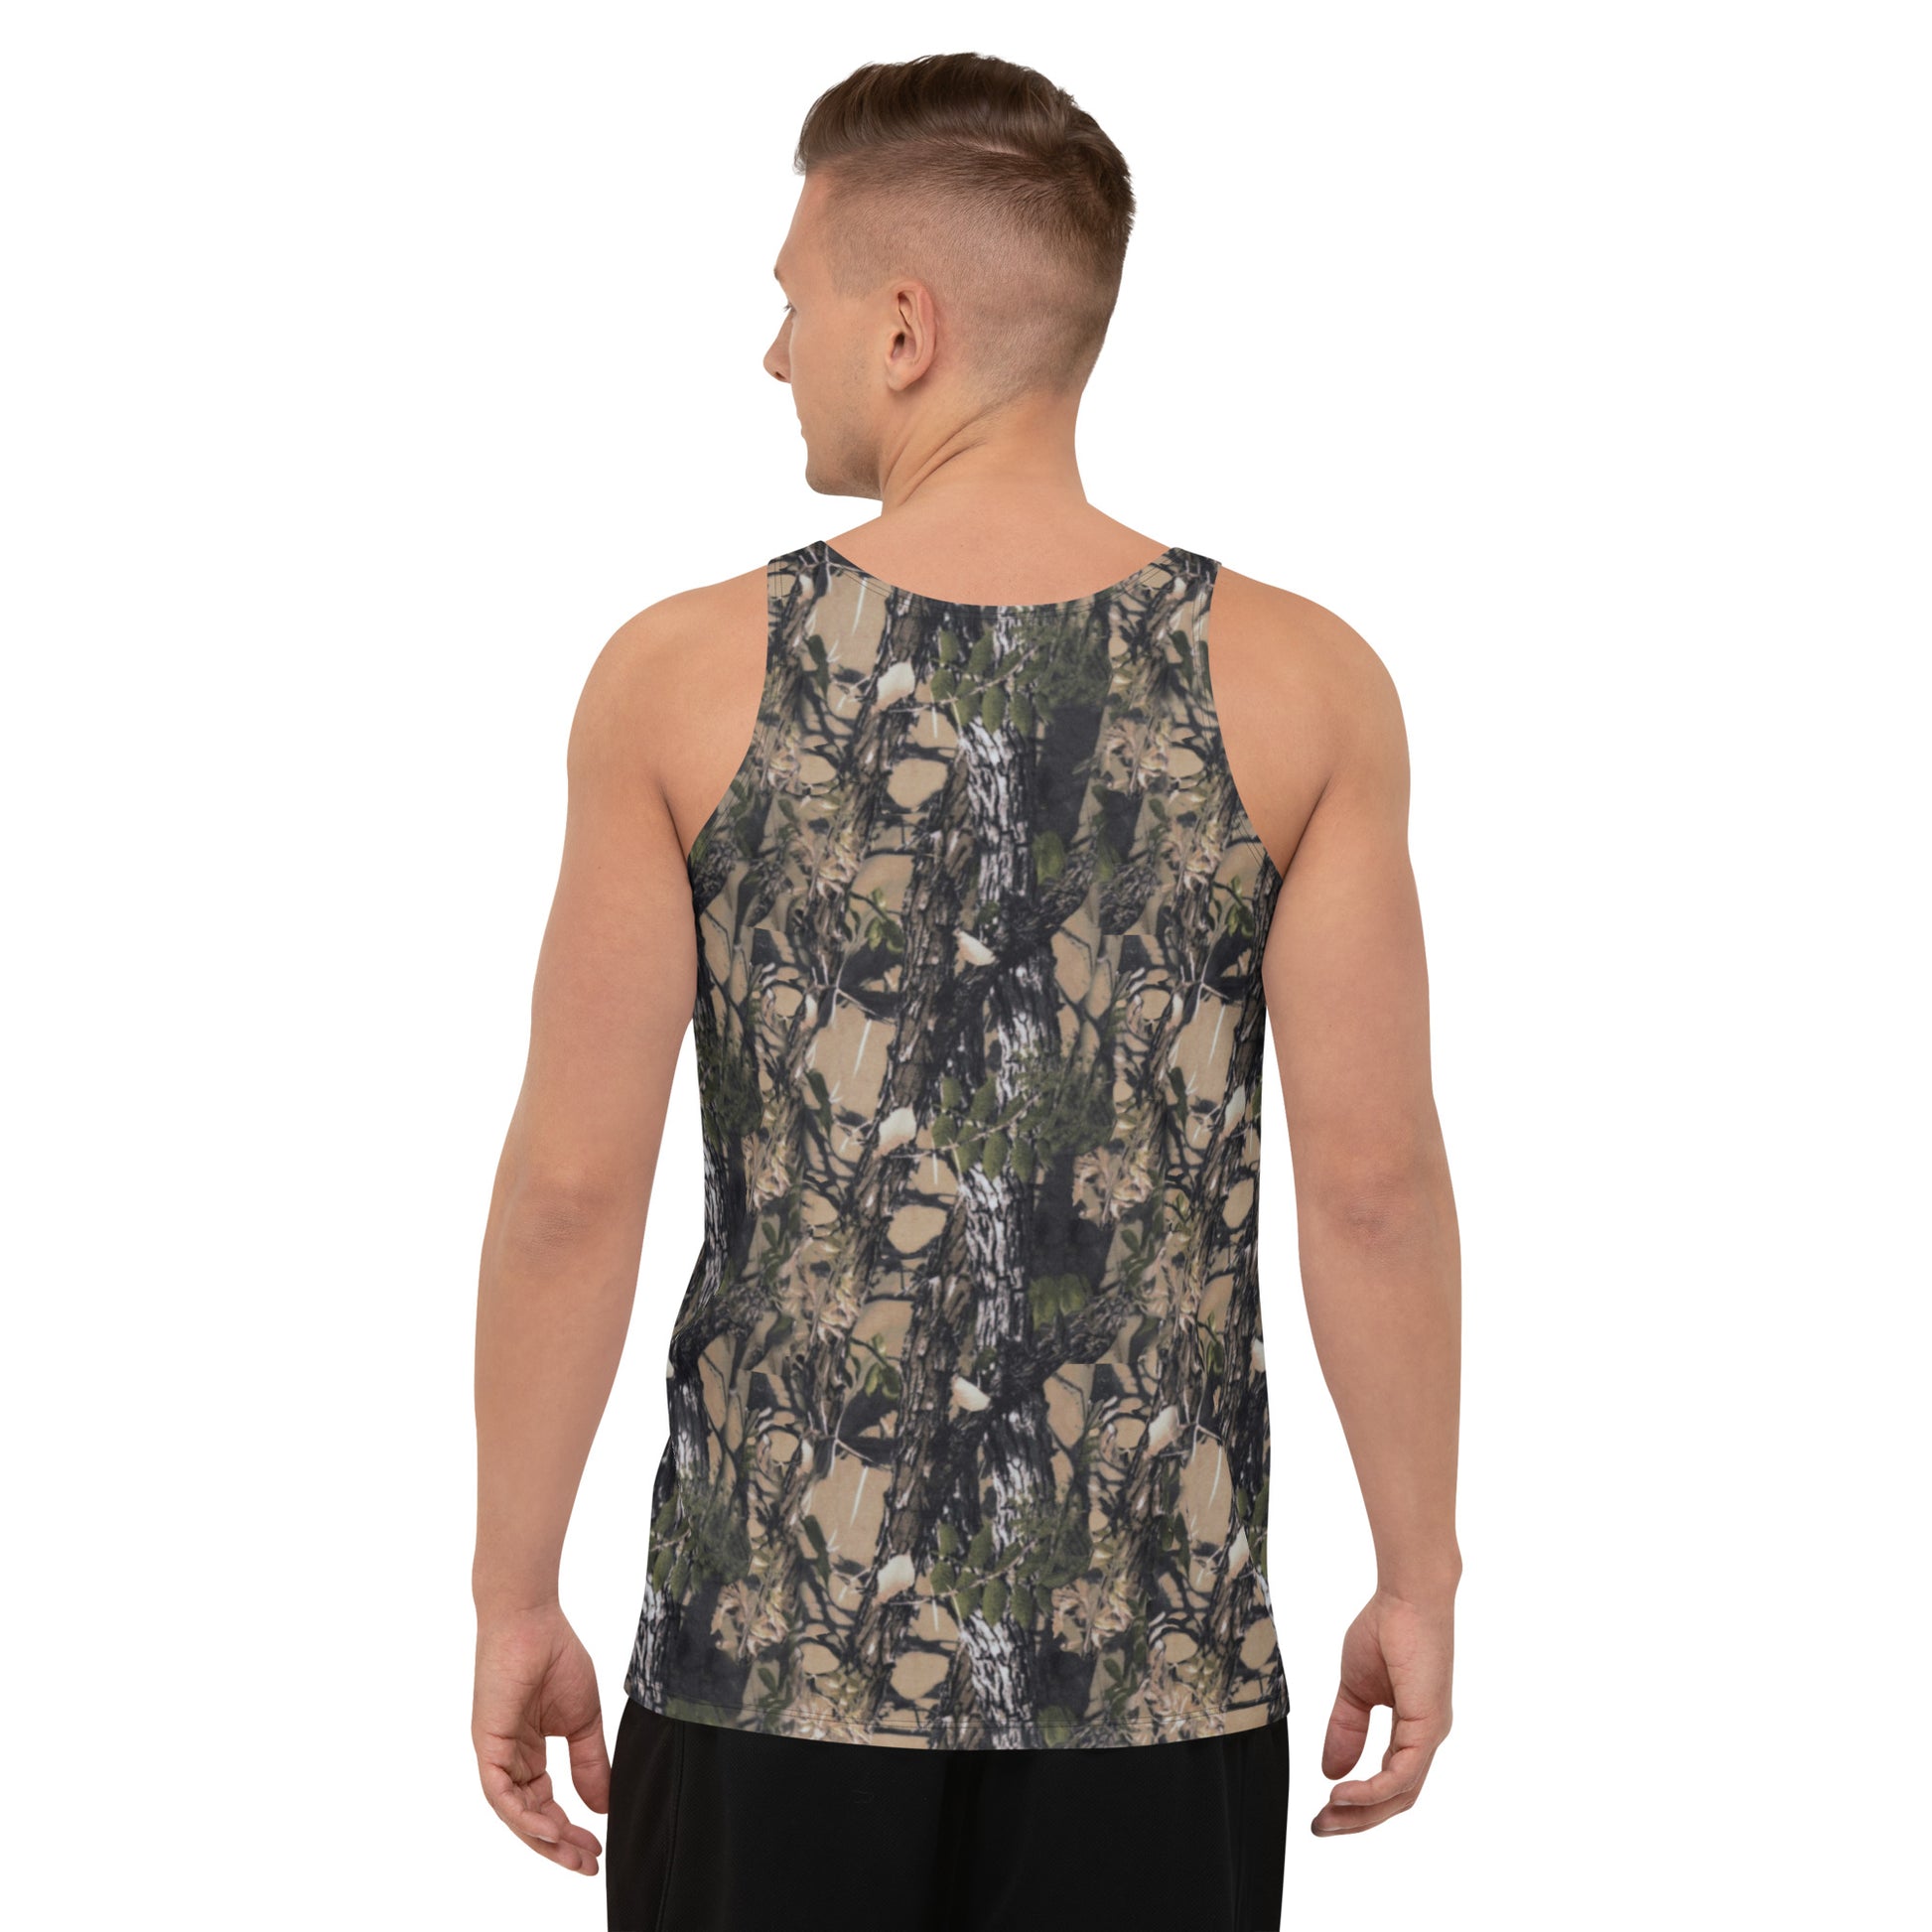 a picture of a man wearing a unisex all over printed Camouflage tank top - back side